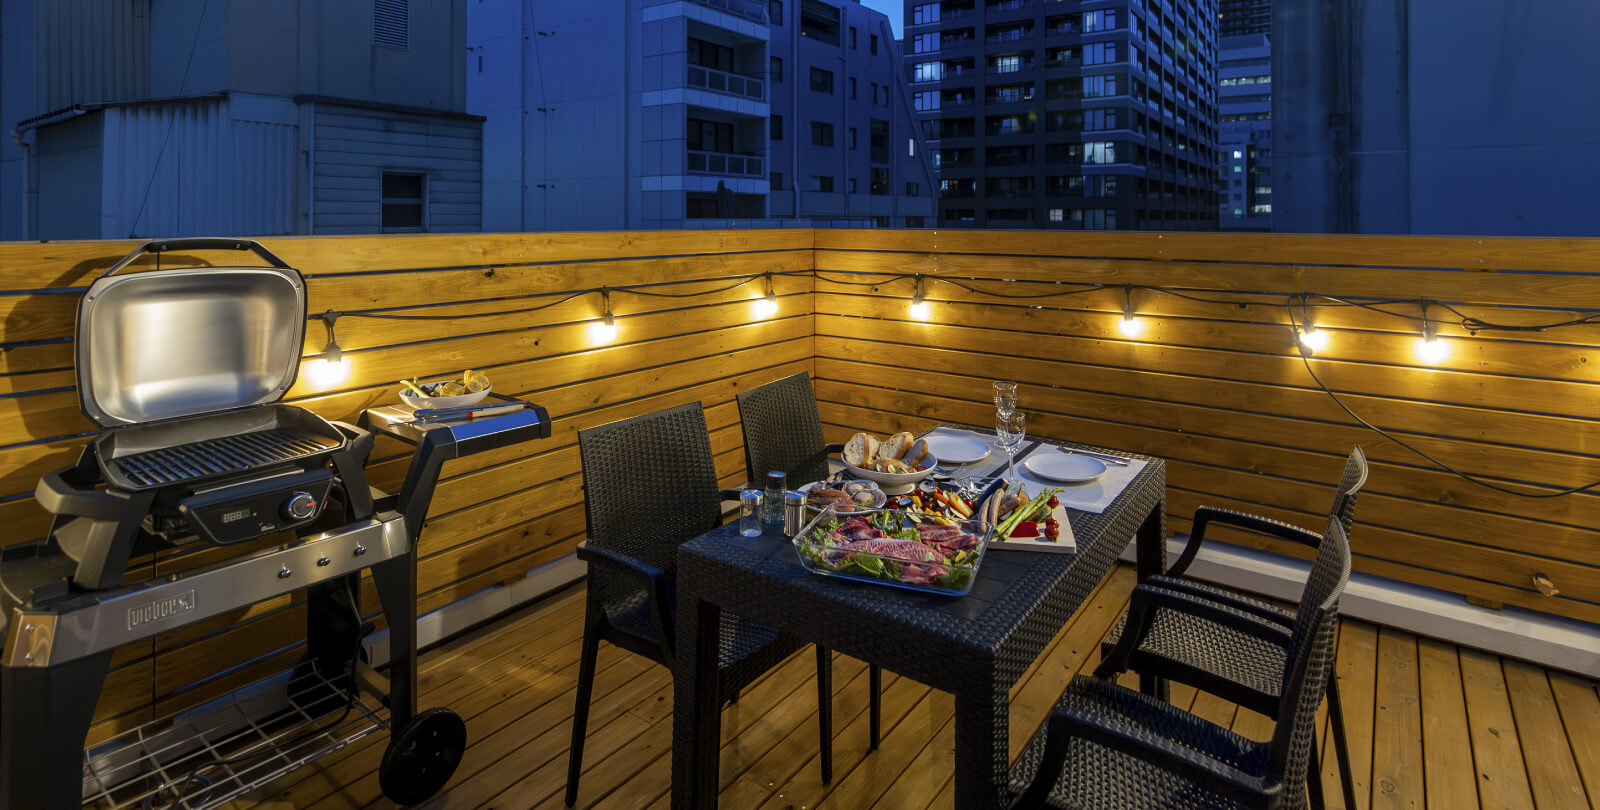 BBQ at the rooftop terrace 